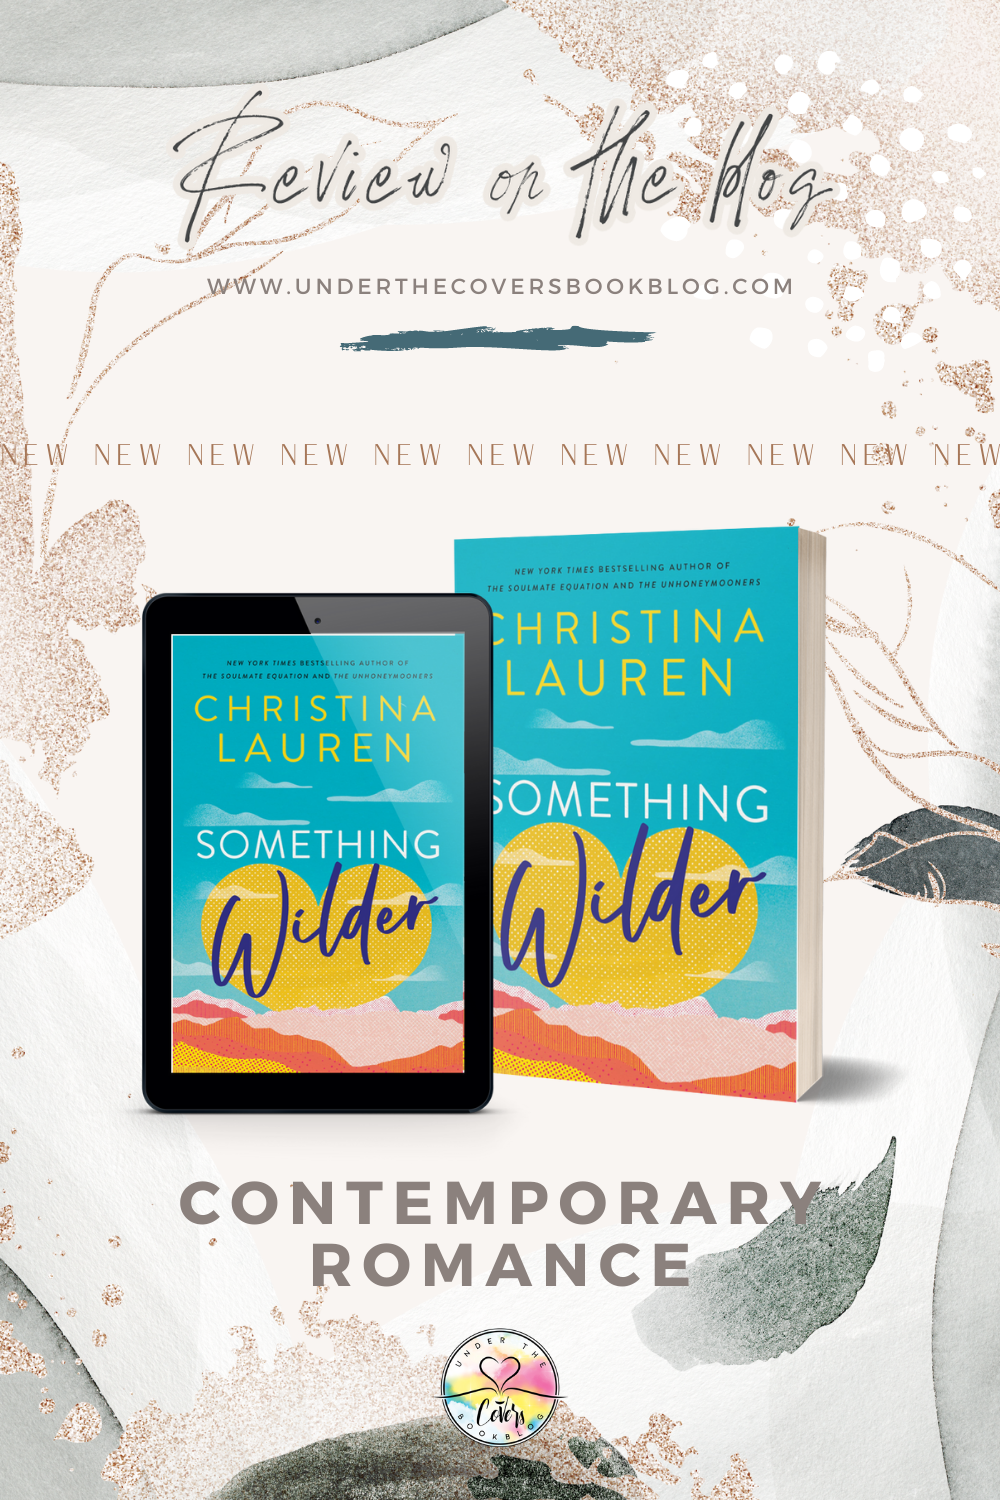 ARC Review: Something Wilder by Christina Lauren